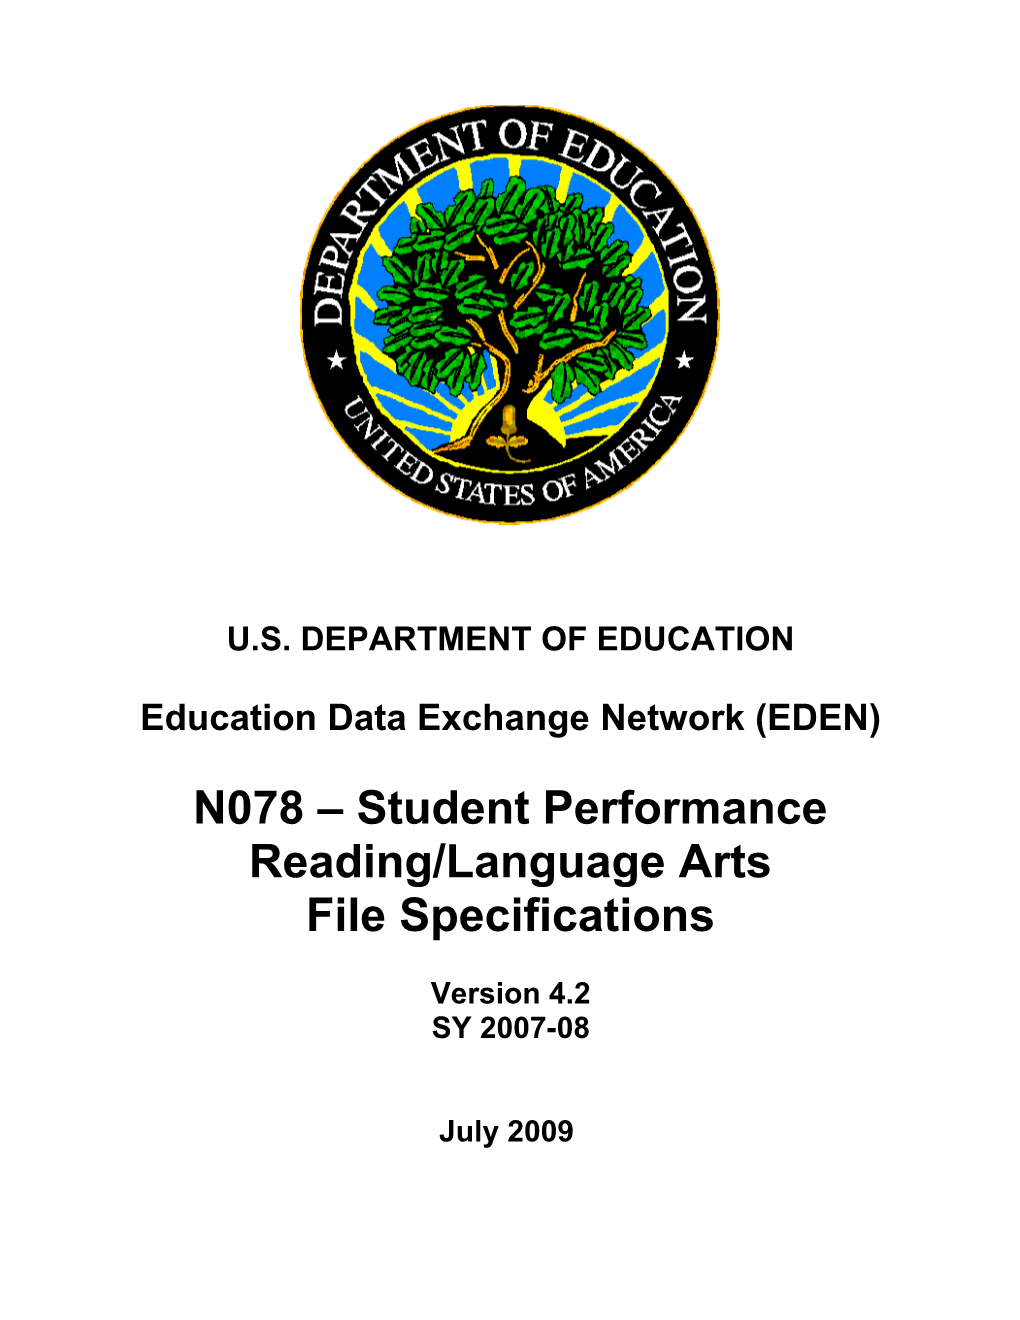 N078-Student Performance Read-Lang Arts File Specifications (MS Word)